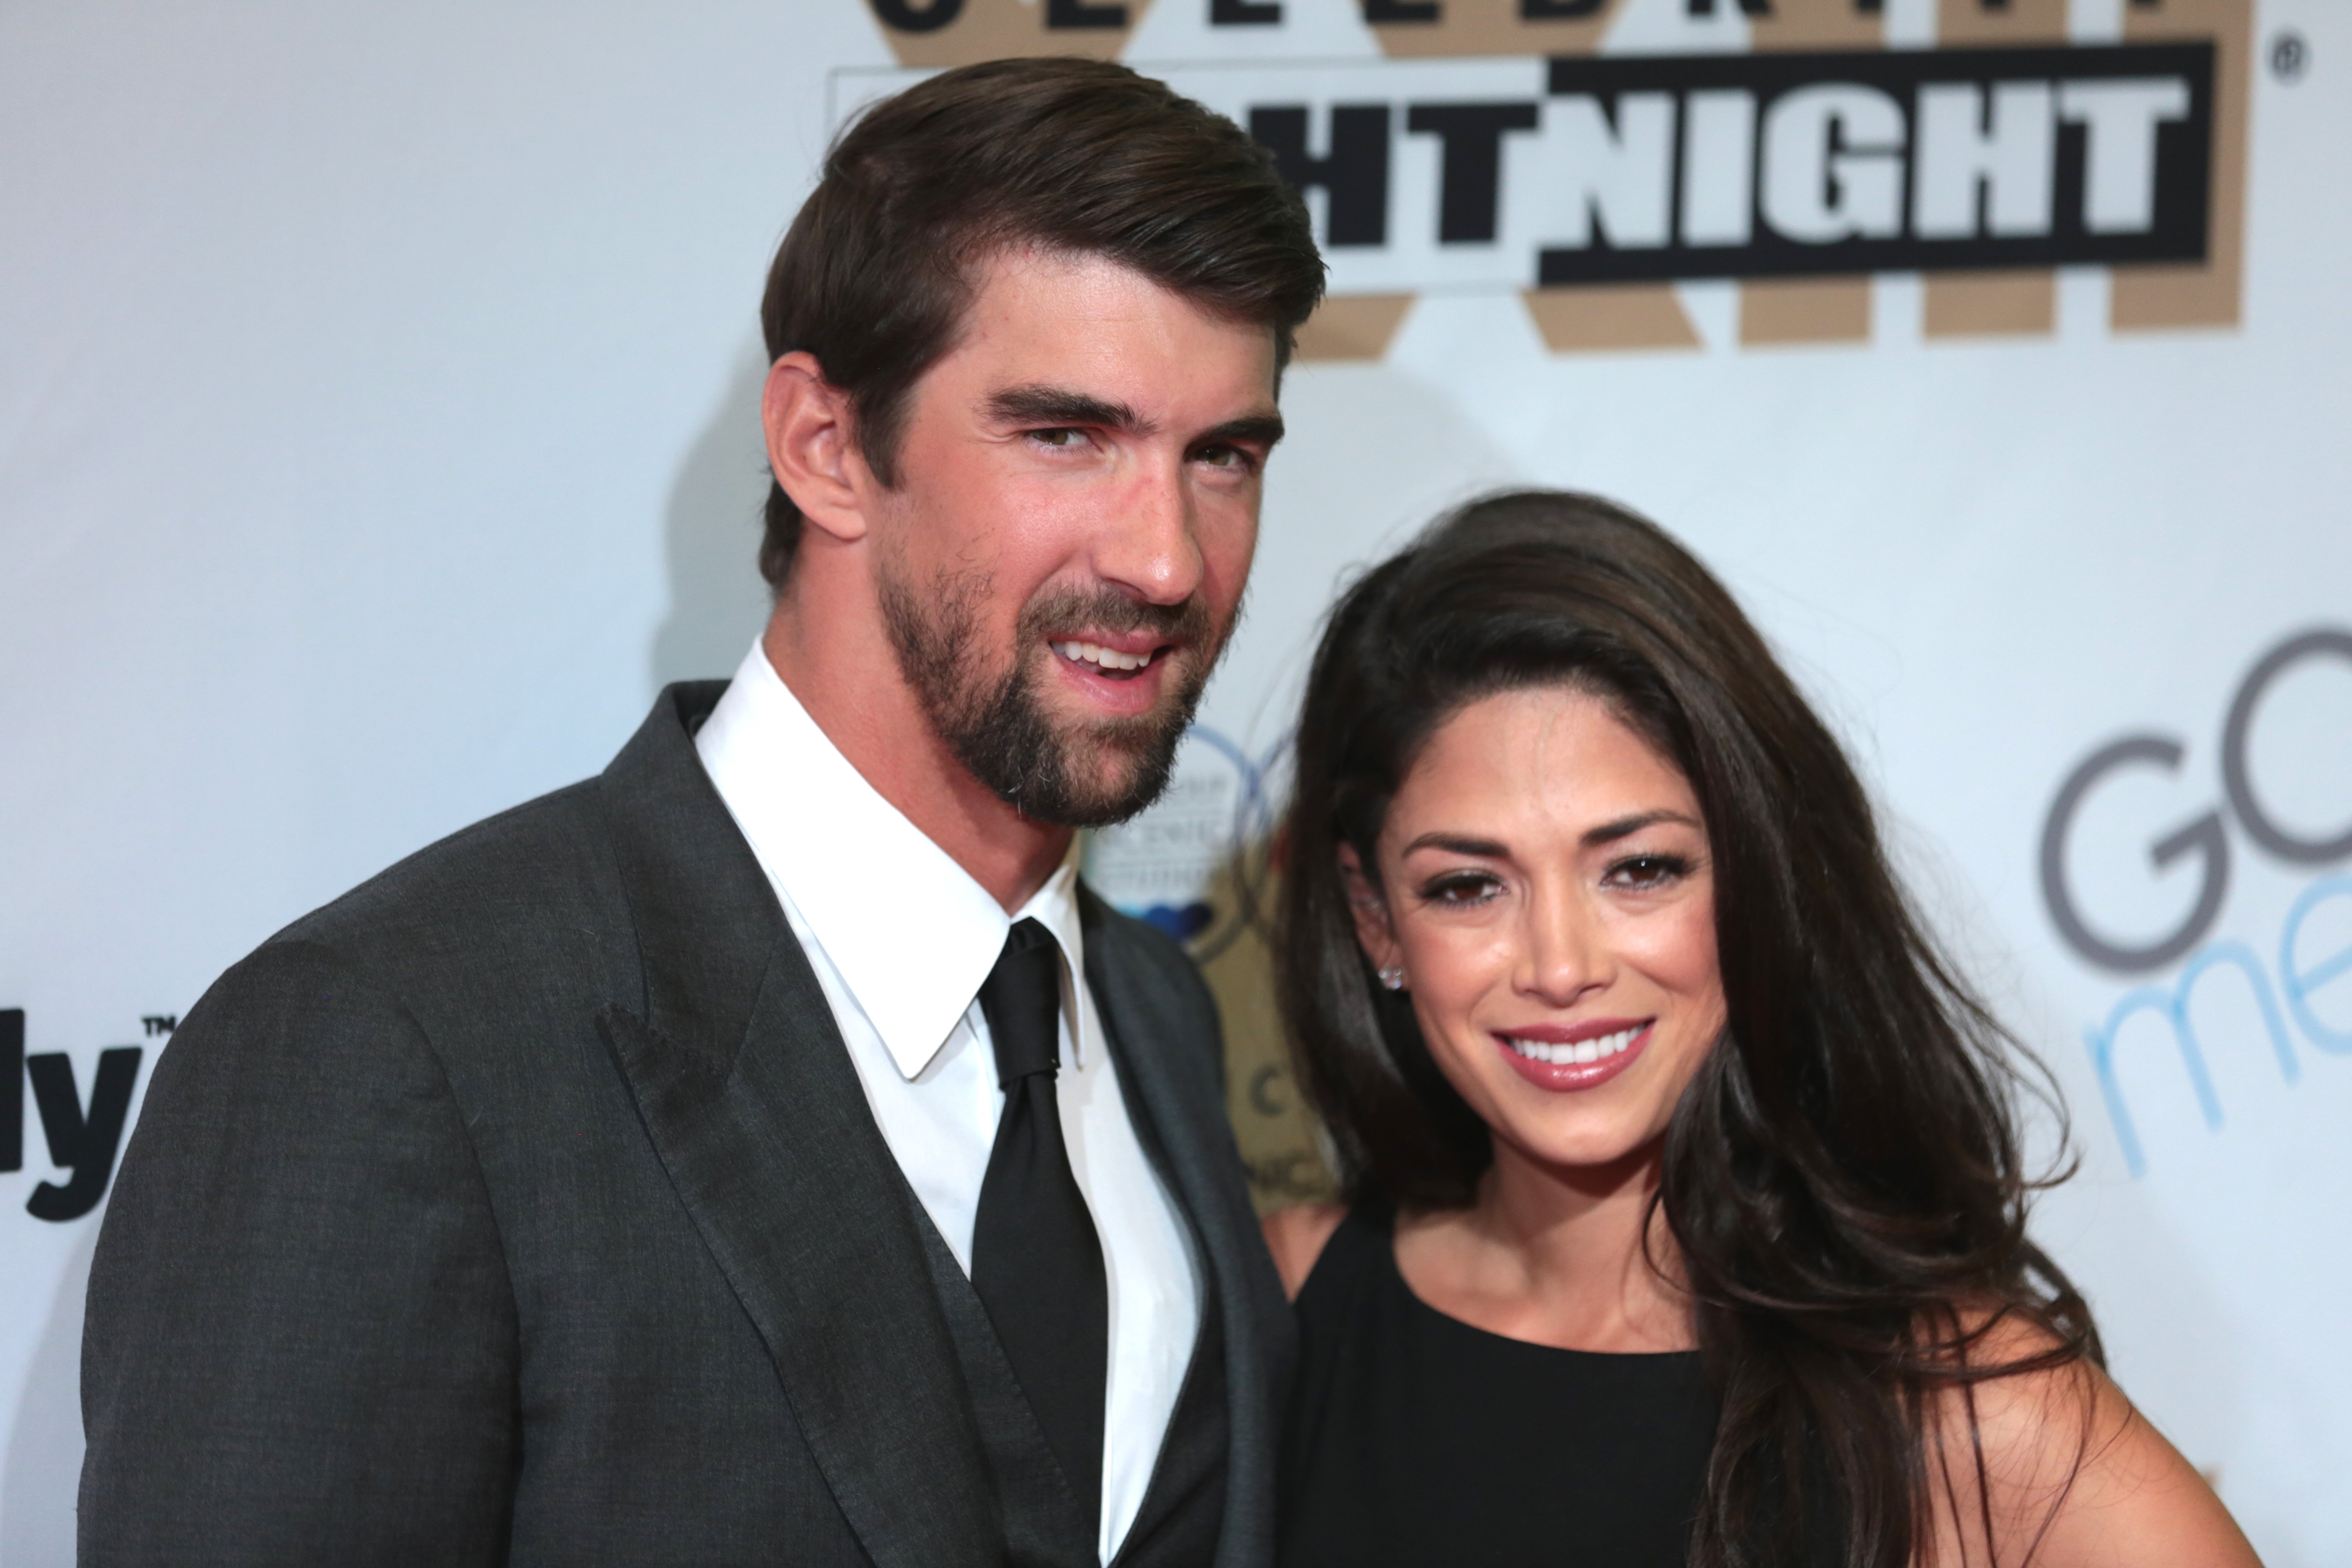 Michael Phelps and Nicole Johnson, 18 March 2017 l Photo: Wikimedia Commons/Creative Commons Attribution-Share Alike 2.0 Generic 